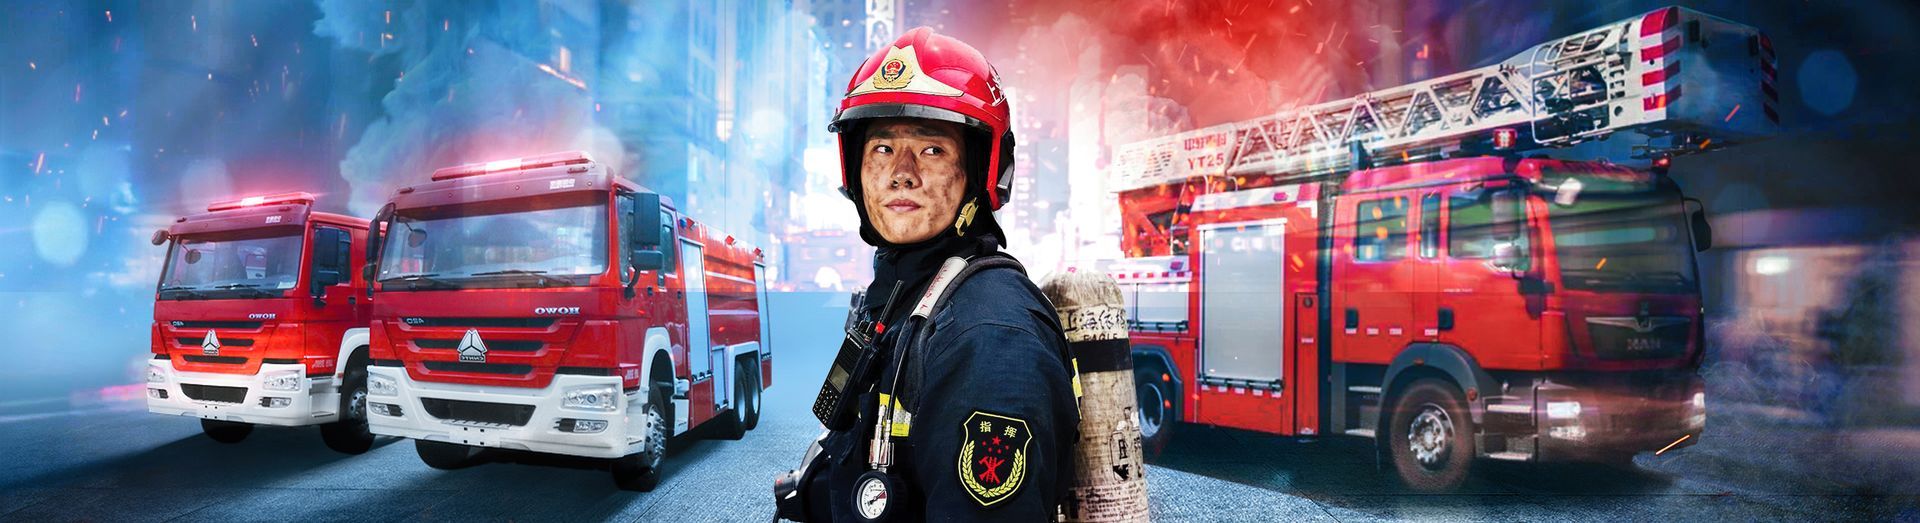 Frontline Shanghai sales information page showing details of the new series about Chinese firefighters in Shanghai.